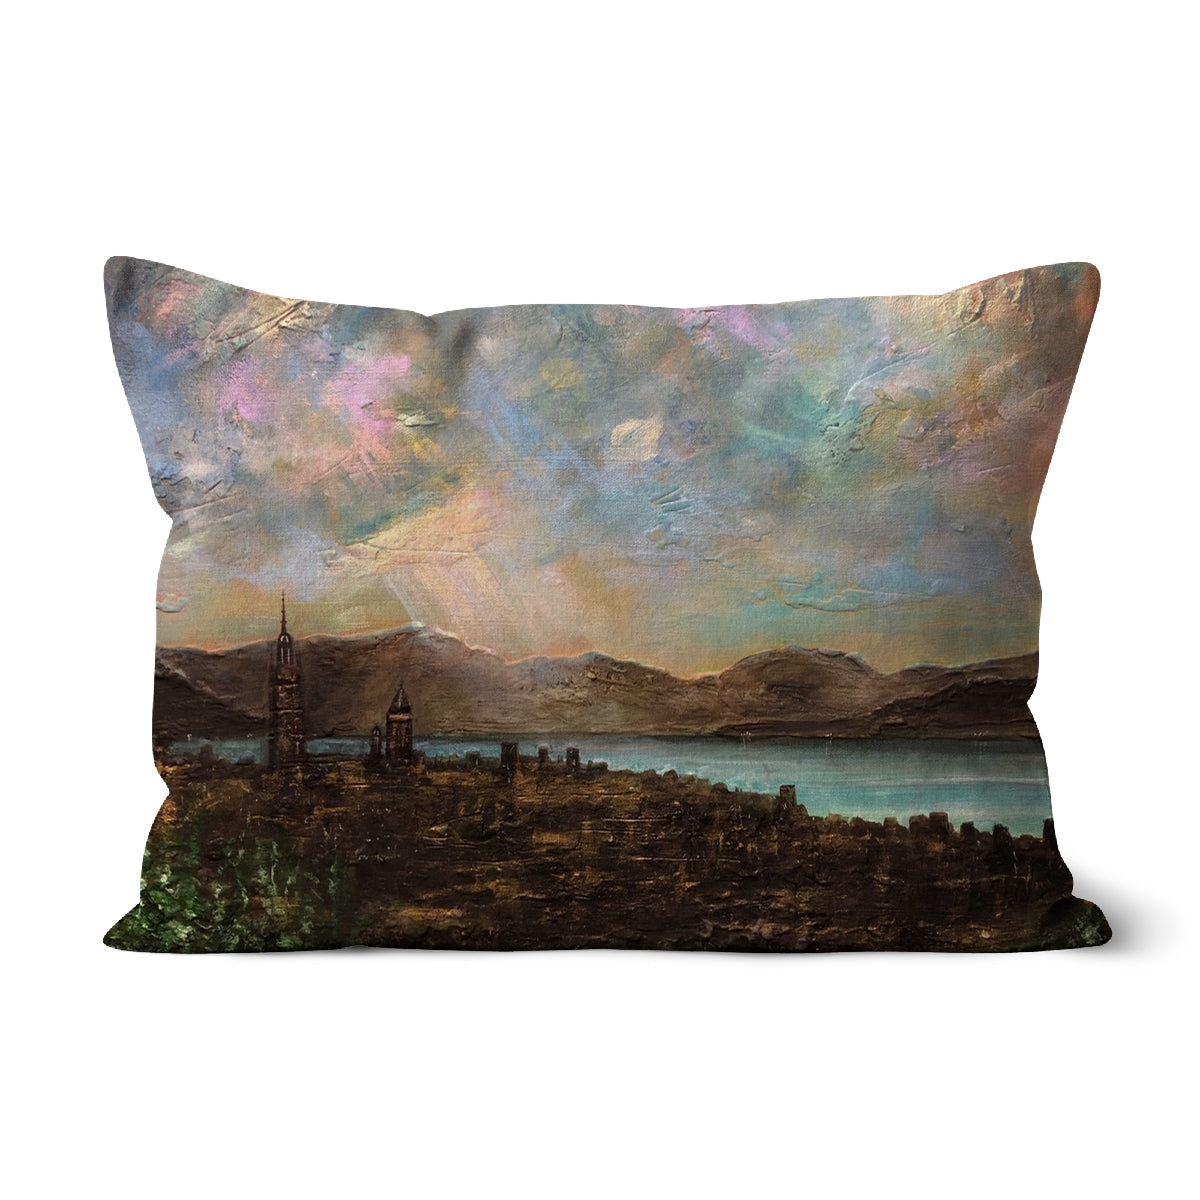 Angels Fingers Over Greenock Art Gifts Cushion-Cushions-River Clyde Art Gallery-Faux Suede-19"x13"-Paintings, Prints, Homeware, Art Gifts From Scotland By Scottish Artist Kevin Hunter